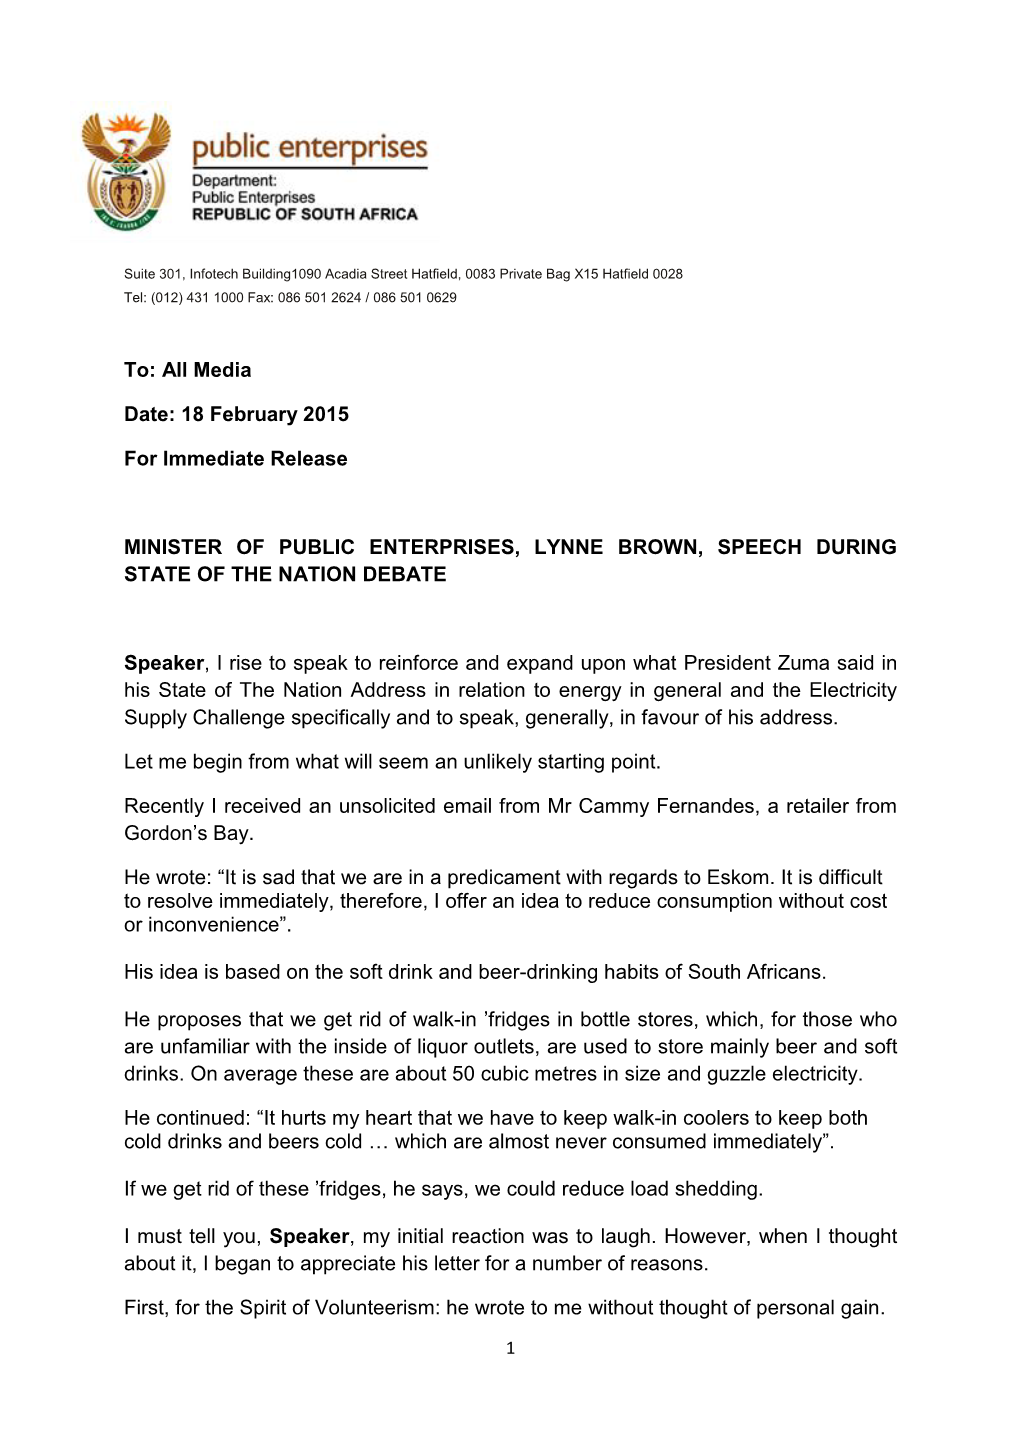 To: All Media Date: 18 February 2015 for Immediate Release MINISTER